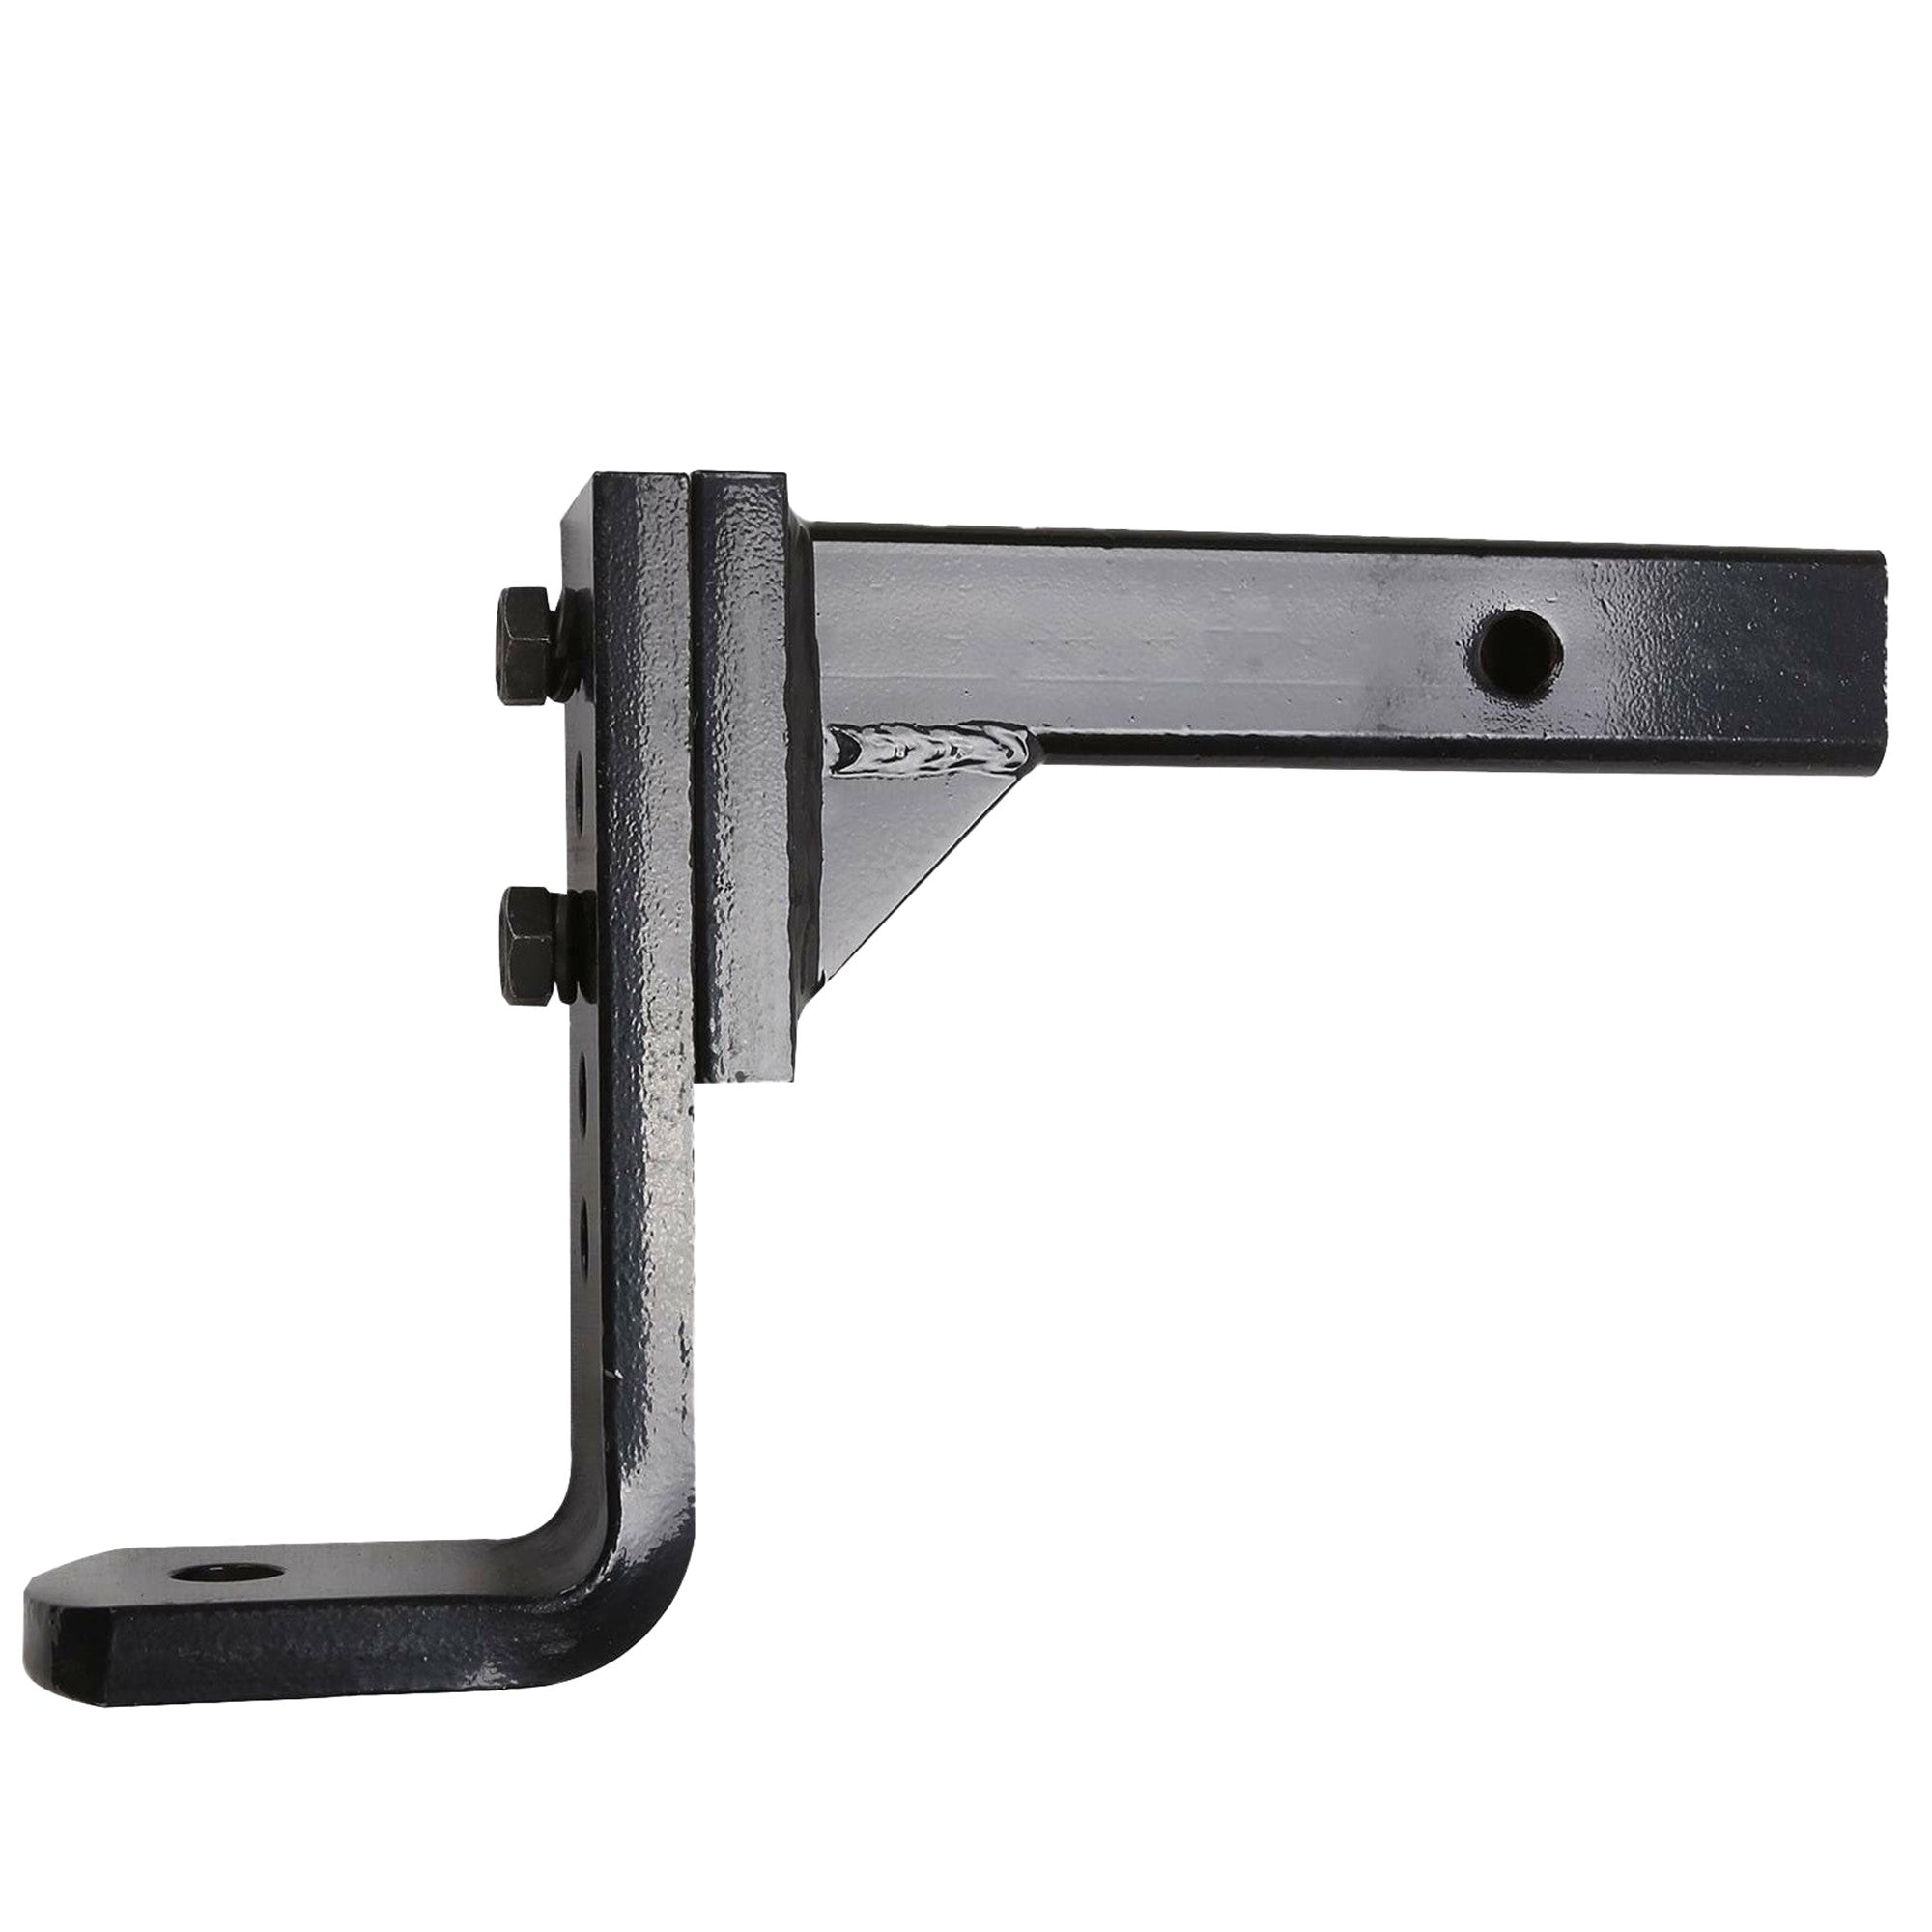 Trailer hitch ball mounts with an extra-durable steel powder coat finish and as much as 4000KG capacity